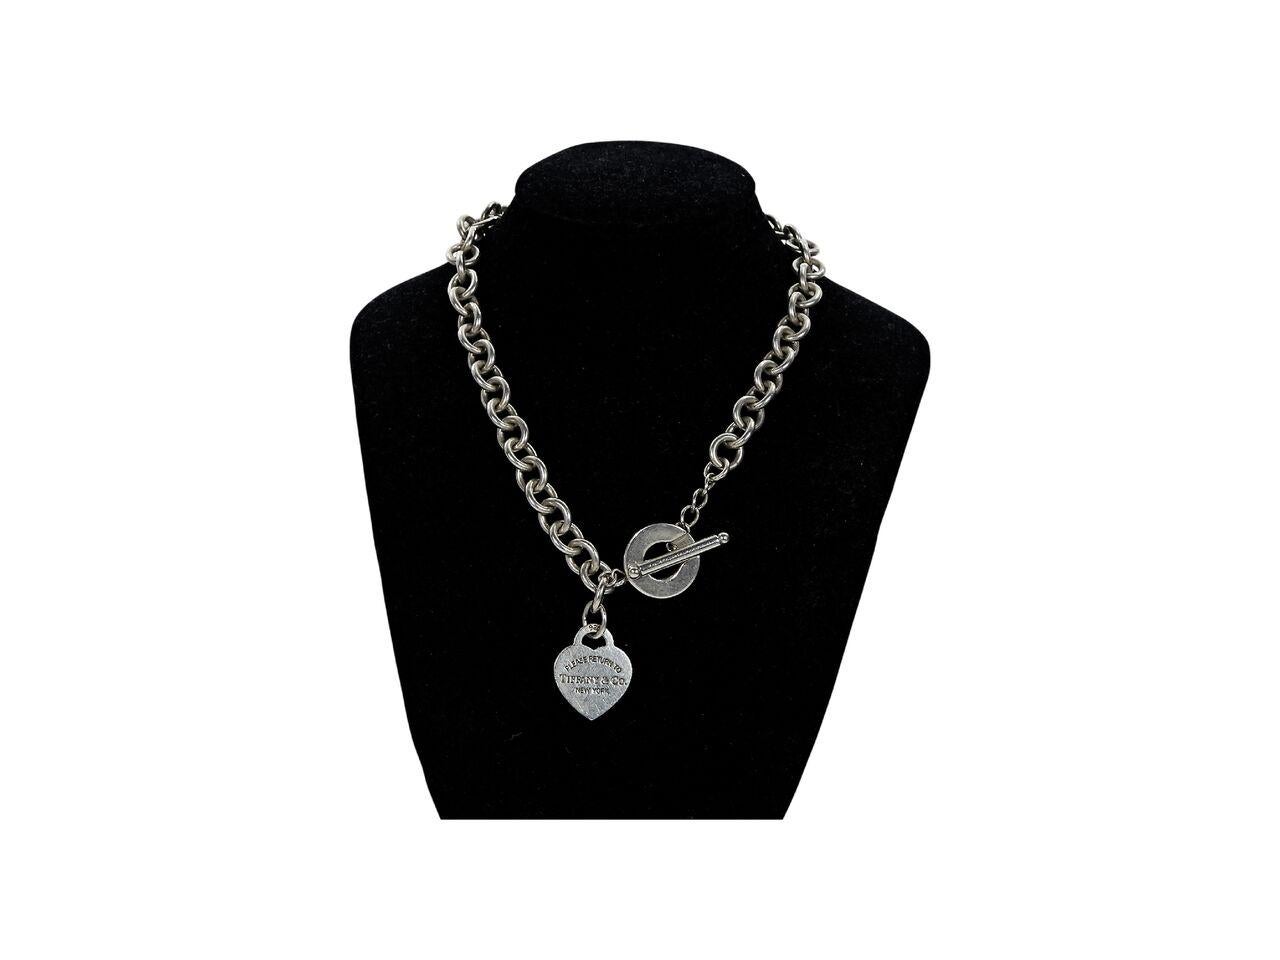 Product details:  Sterling silver heart tag choker necklace by Tiffany & Co.  Toggle closure.  16